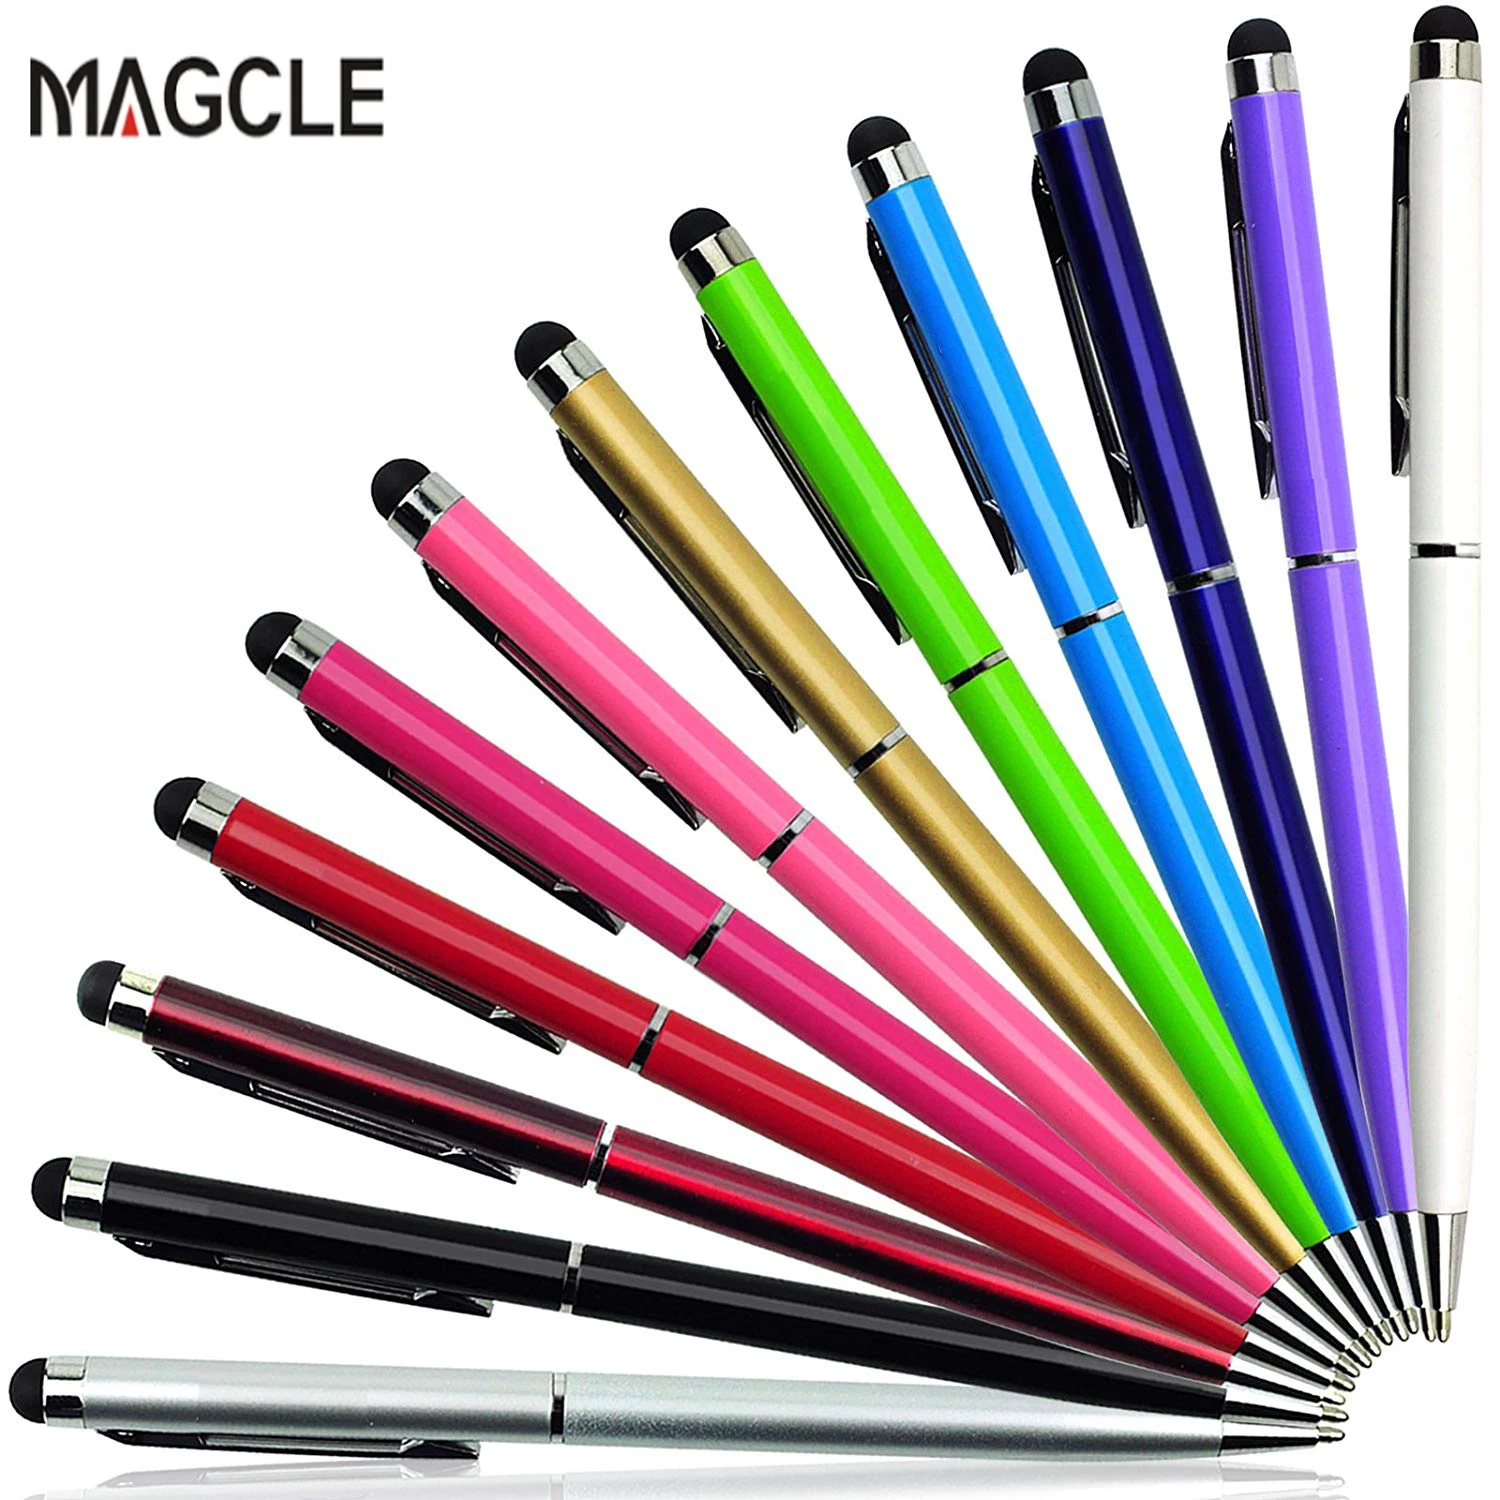 Universal 2 in 1 Touch Screen Pen Stylus for iPhone iPad Samsung Tablet PC Phone 